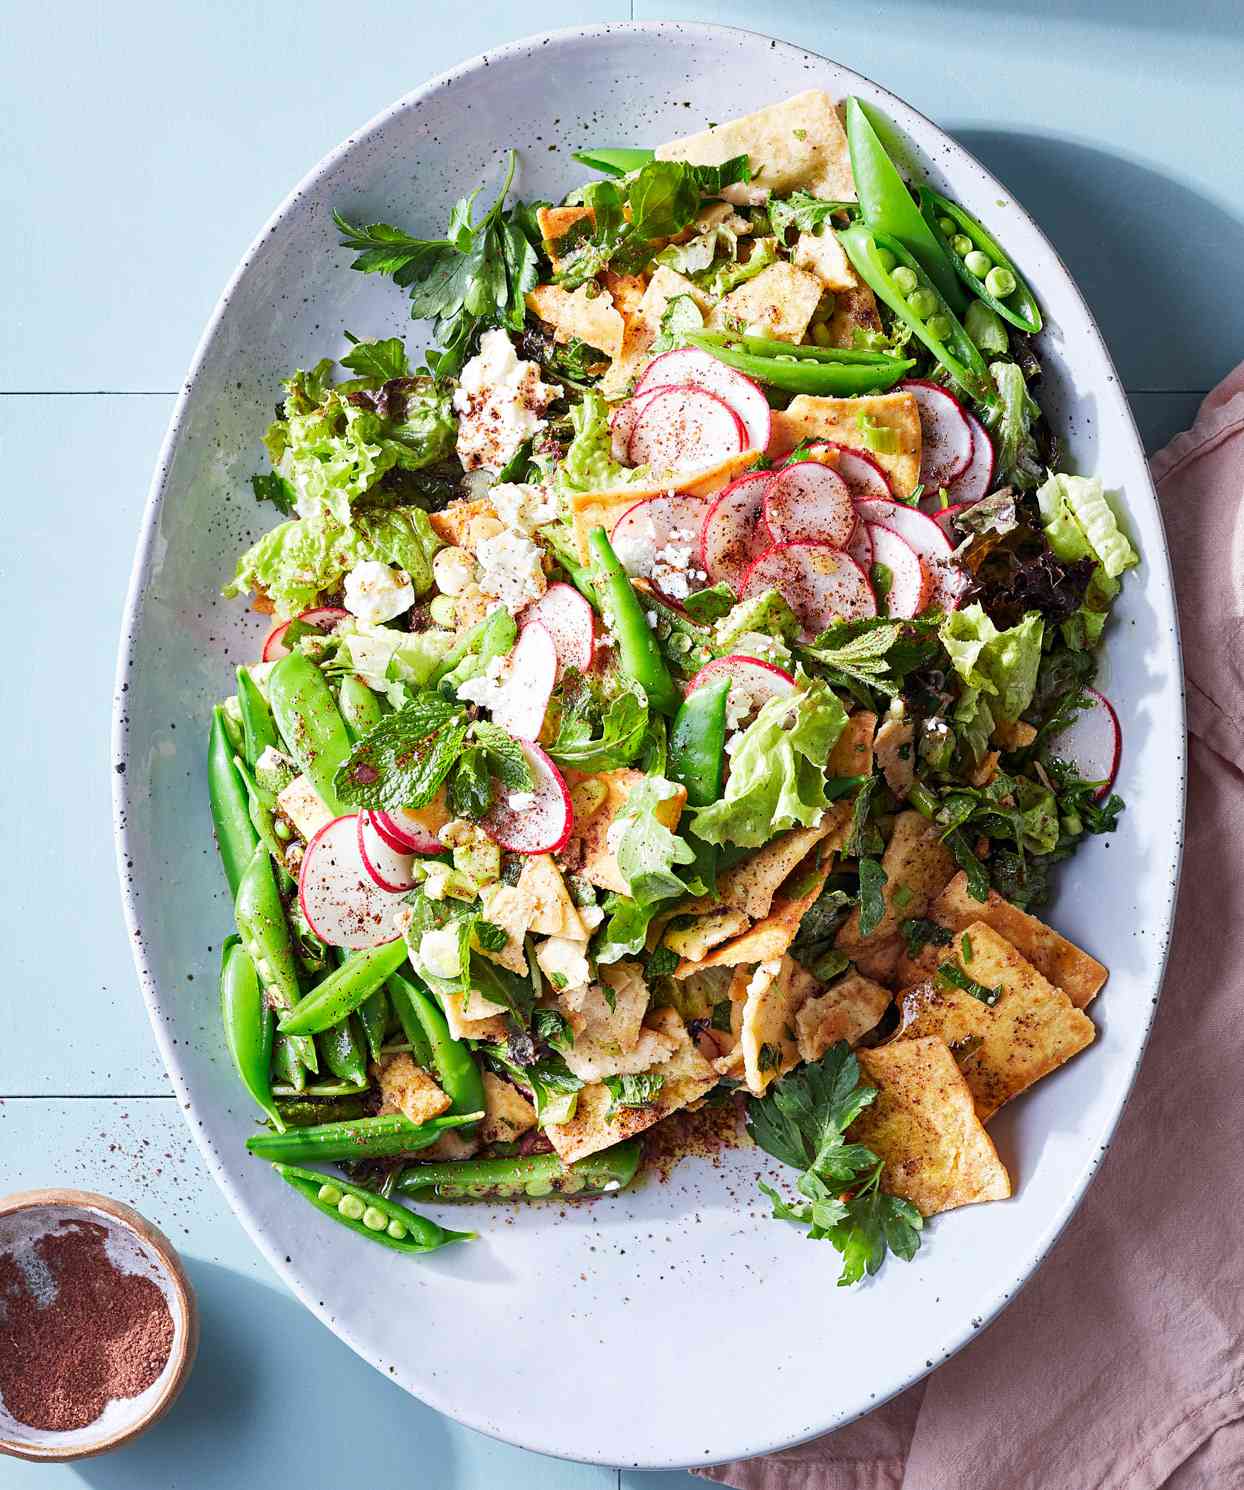 <p>Popular in Lebanon and Israel, fattoush is a crunchy, lemony salad of toasted pita, herbs and vegetables. This delicious and quick version showcases spring vegetables like snap peas and radishes. It's seasoned with sumac, which has a distinctly sour, earthy flavor, unlike anything else. Find it in Middle Eastern markets or online.</p>
                          